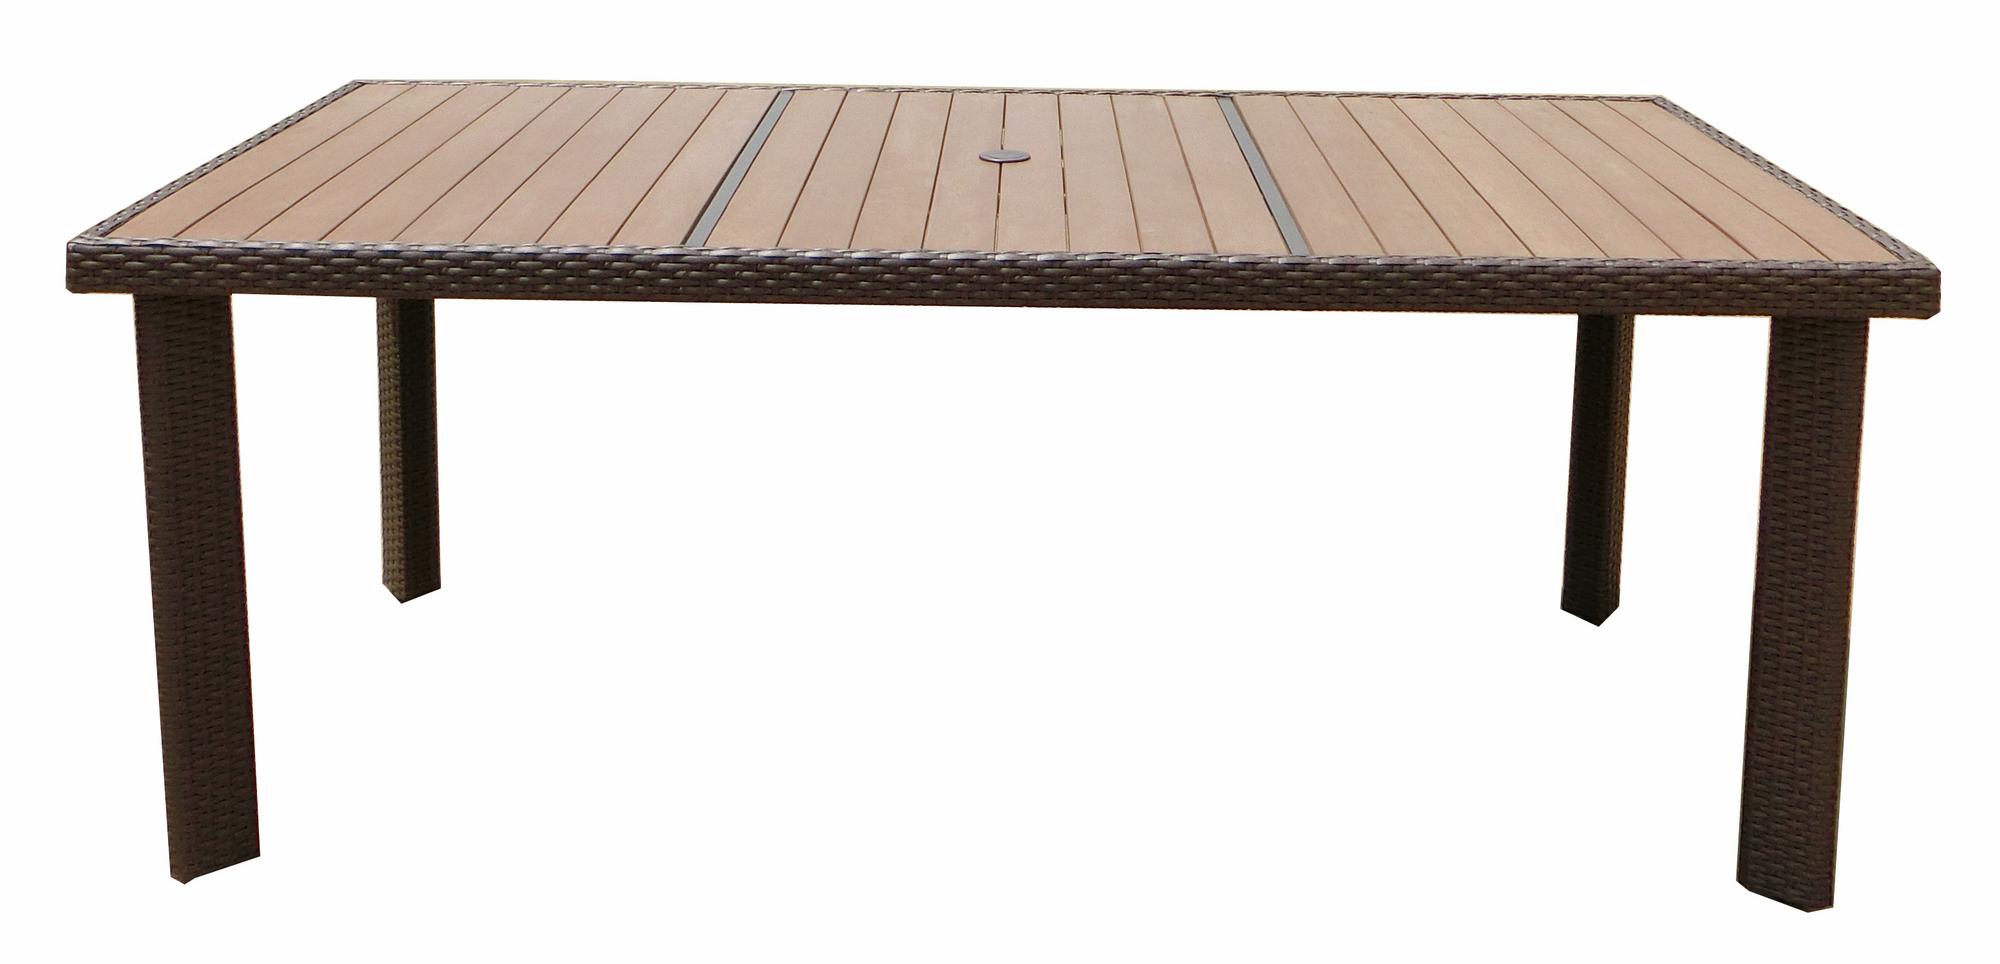 Sb-3775-19 South Beach Wicker Patio Rectangle Dining Table